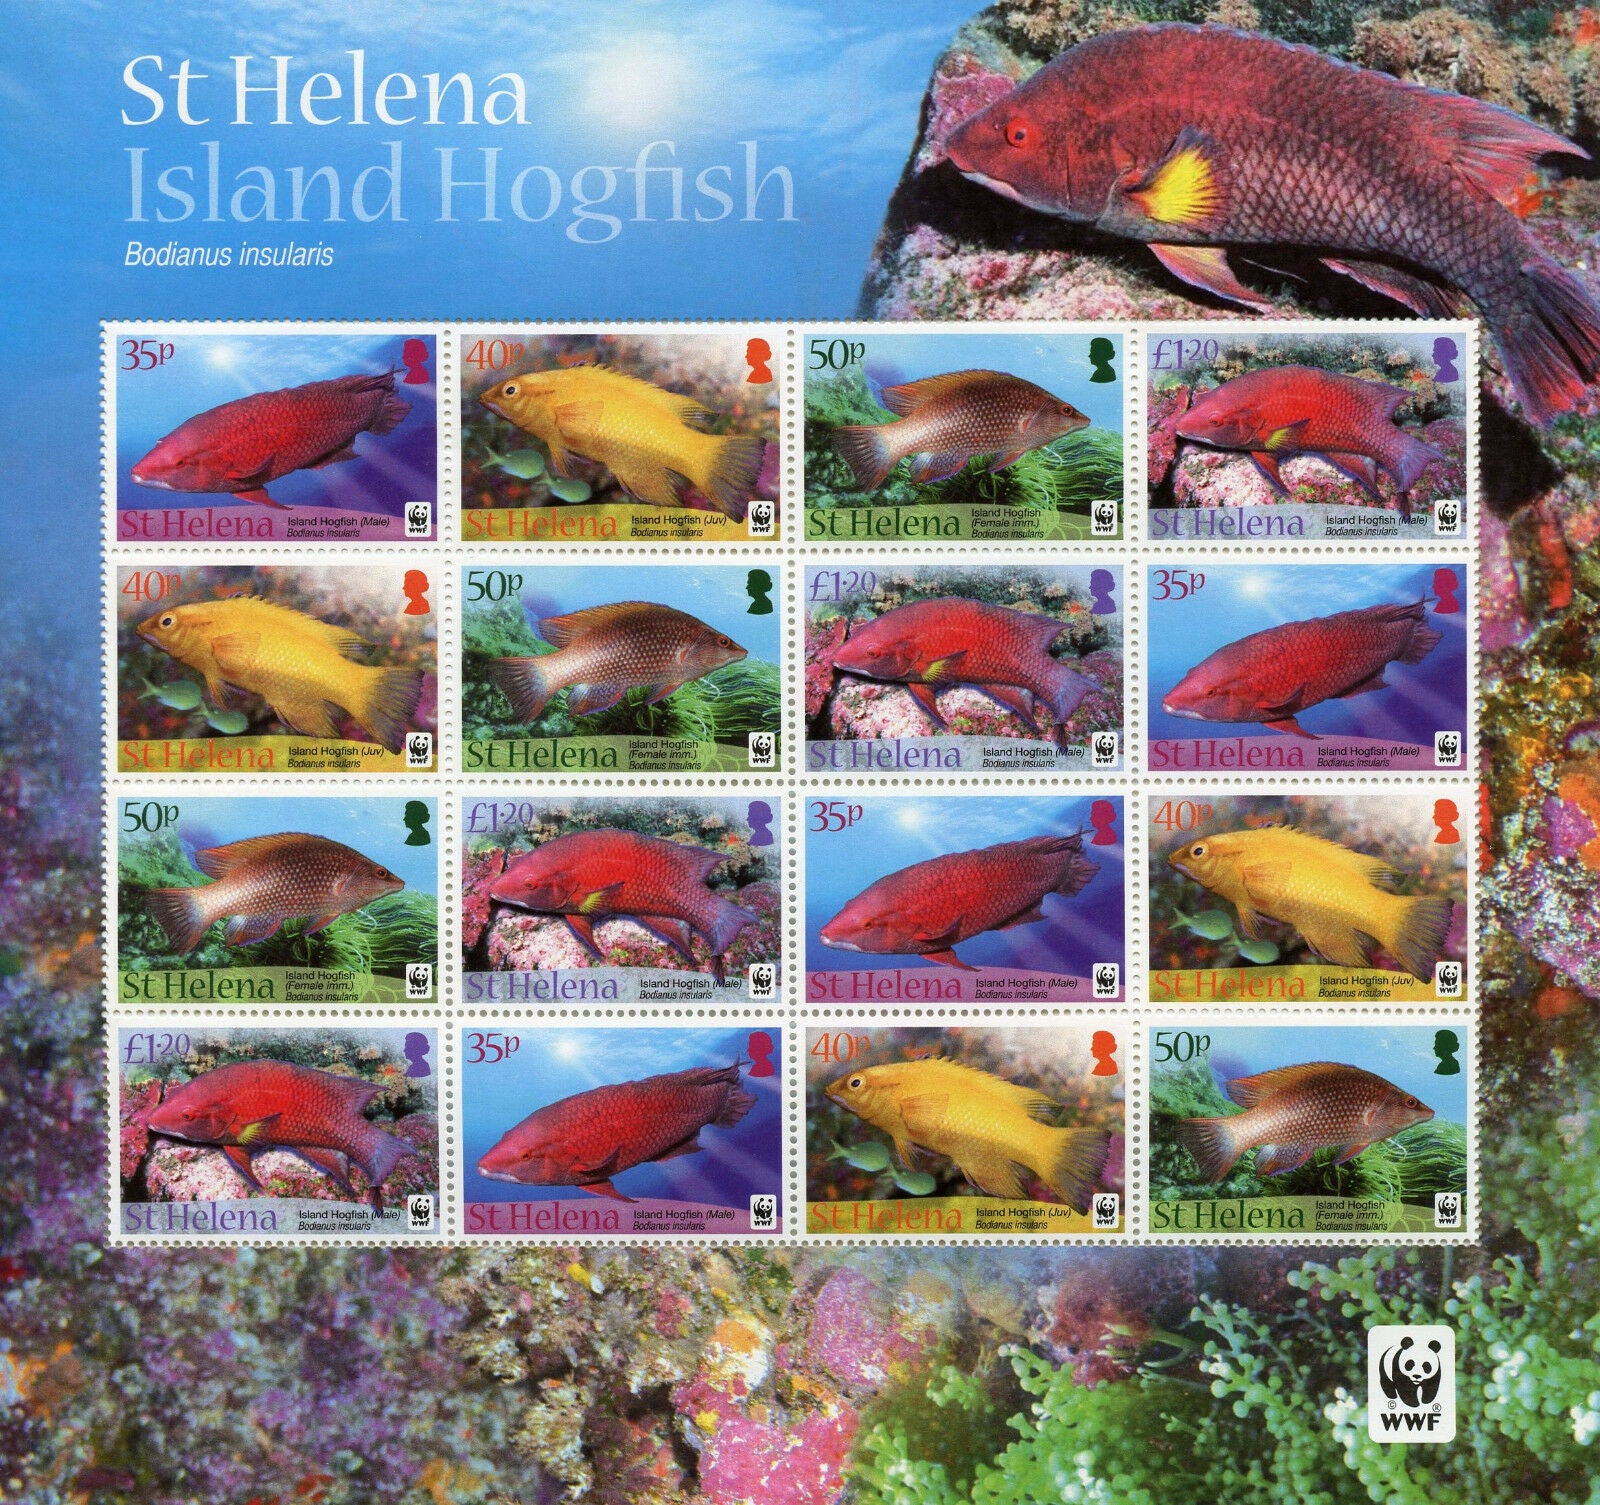 St Helena 2011 MNH Island Hogfish WWF 16v M/S Fish Fishes Stamps